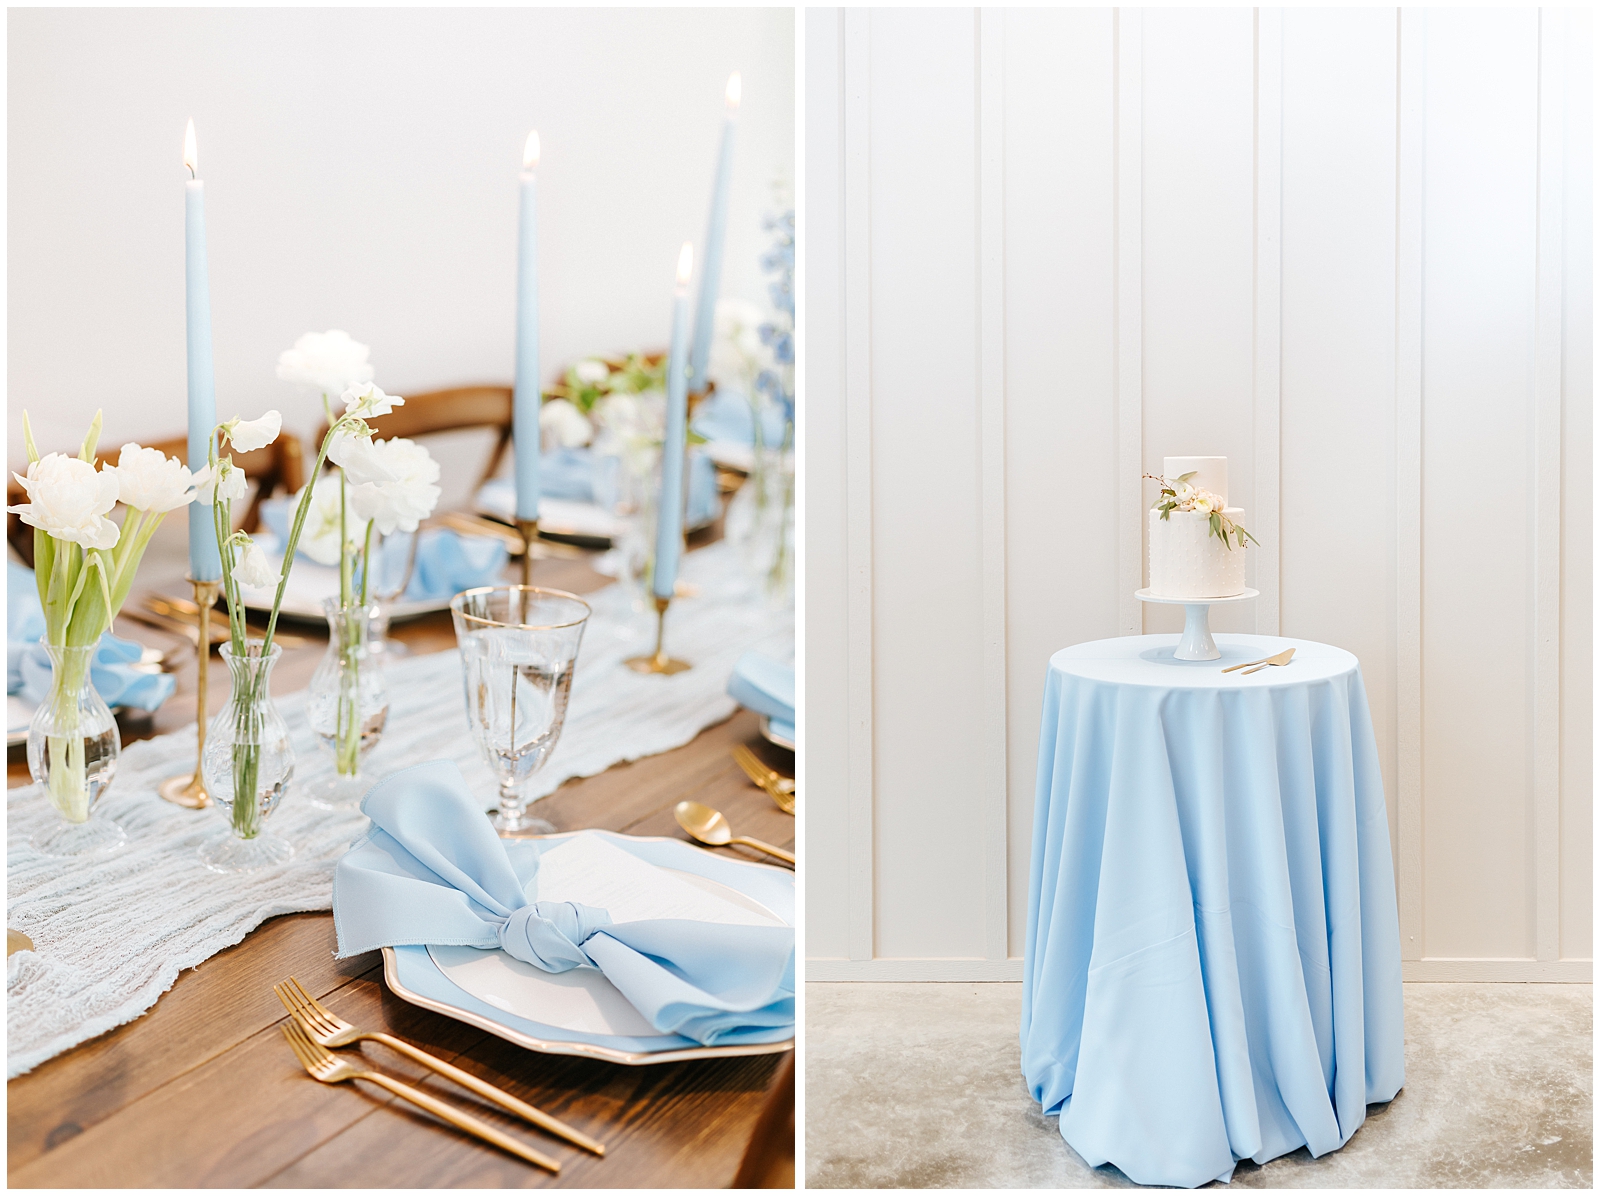 Classic Elegant Florida Wedding Tablescape and Cake with gold stemware, dusty blue accents and Candles